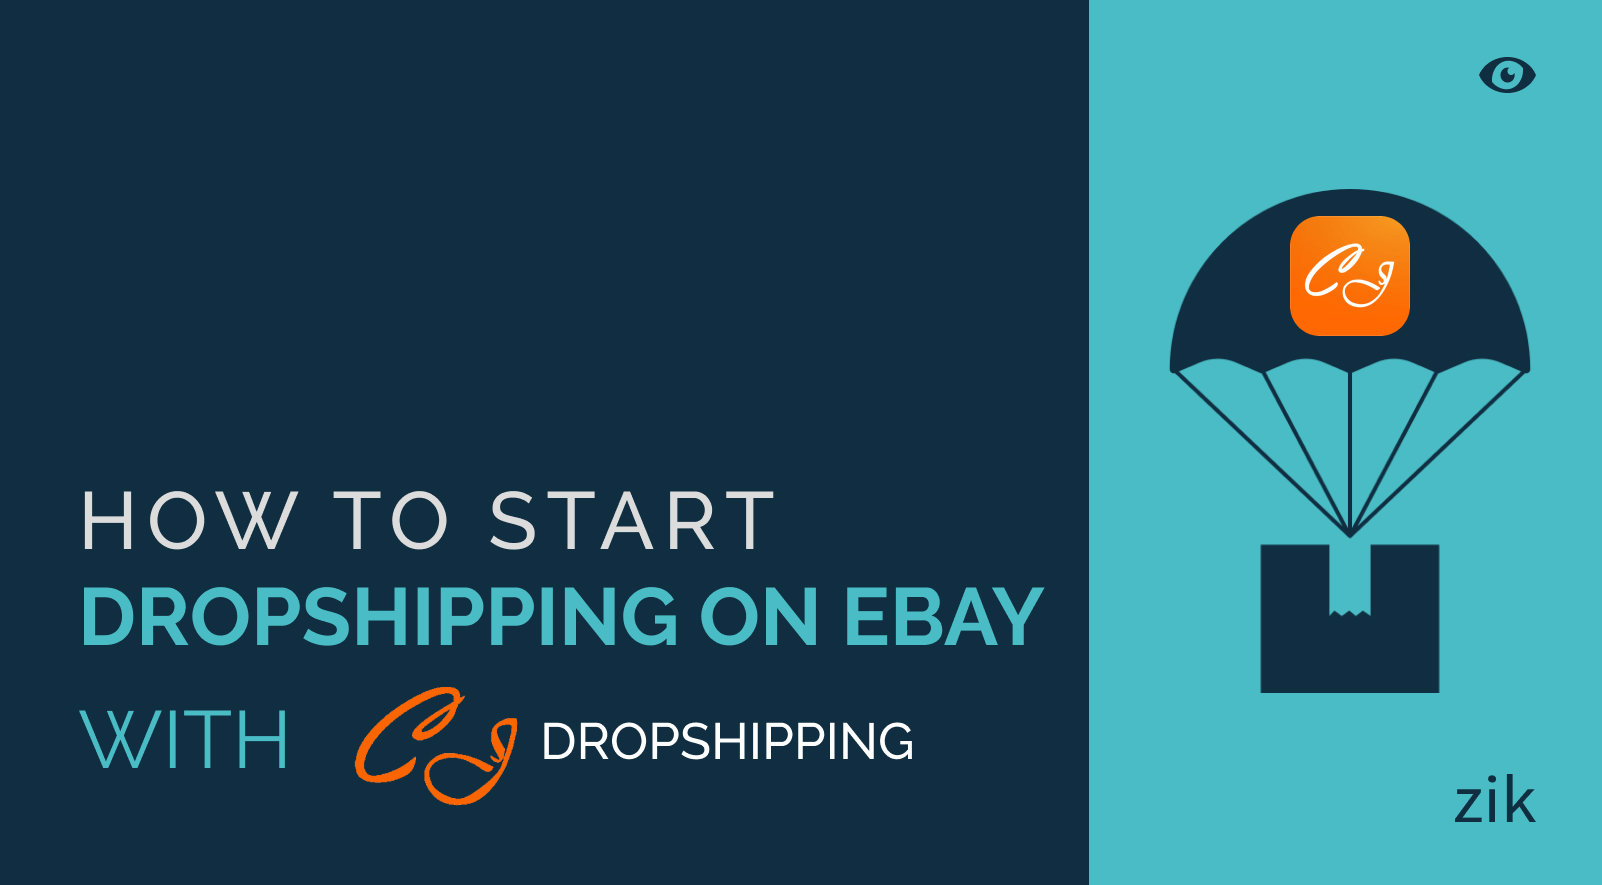 CJ Dropshipping to  [Complete Guide]